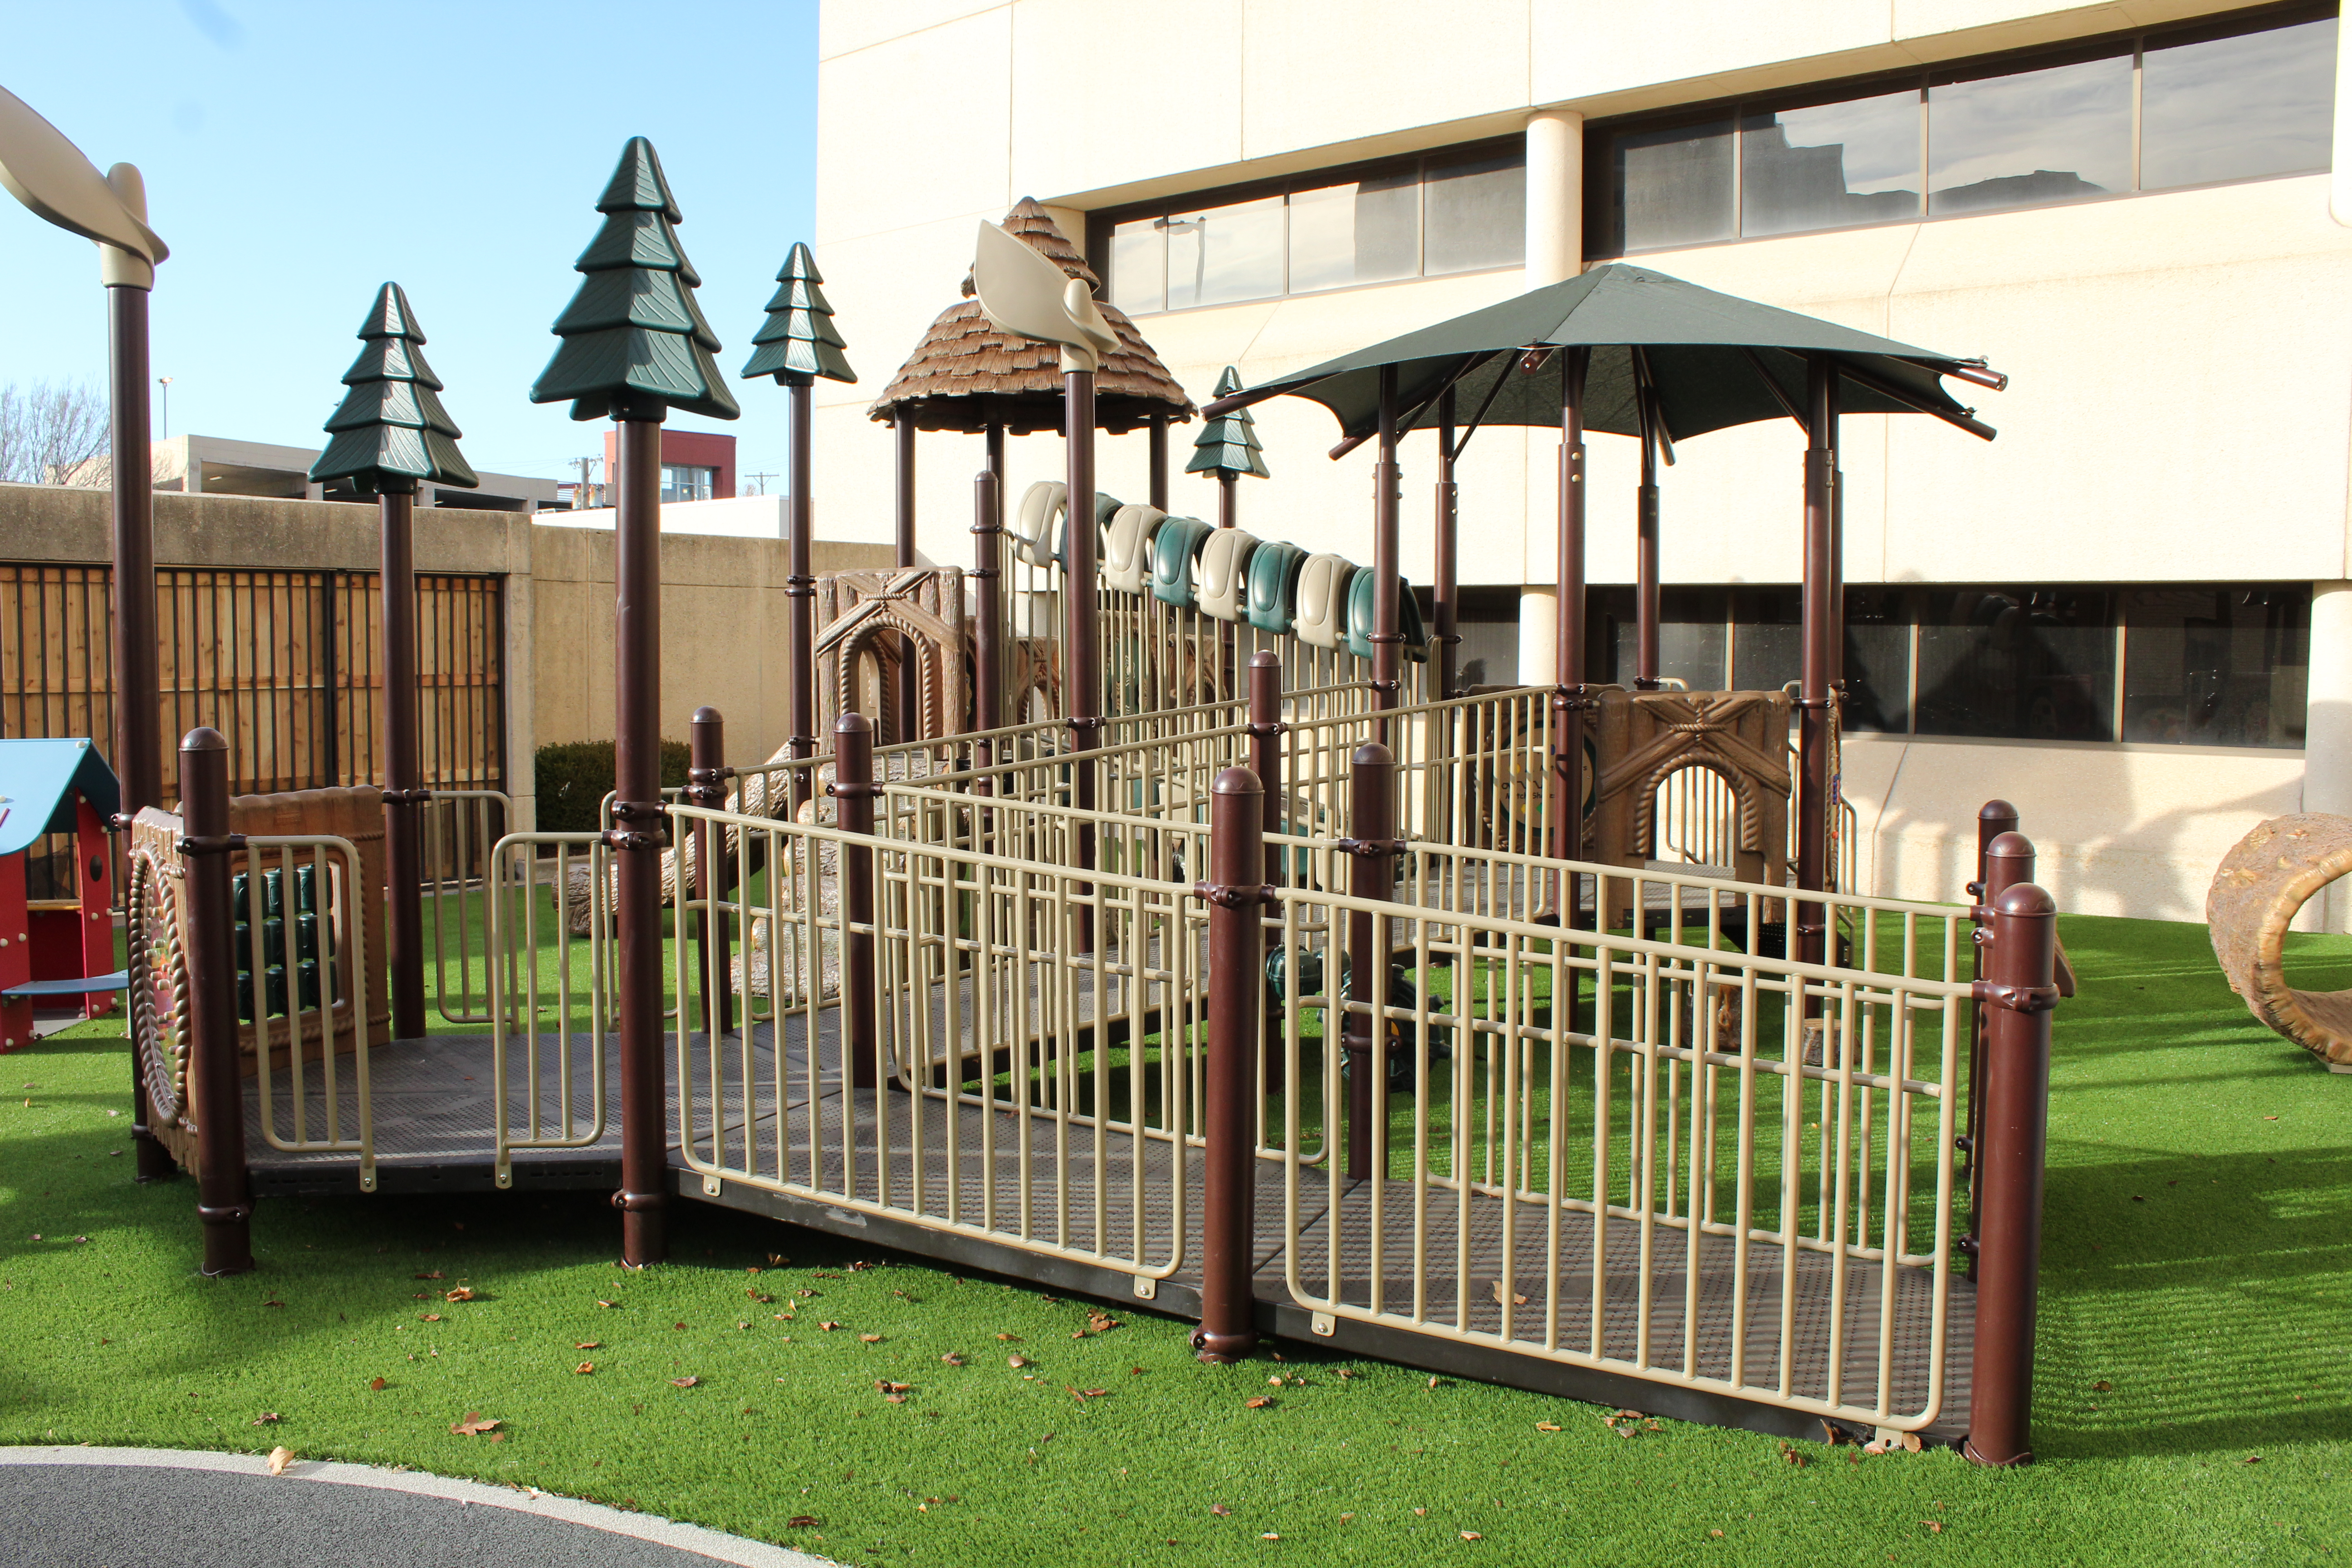 A wide image of the playground, showing the tactile staircase.